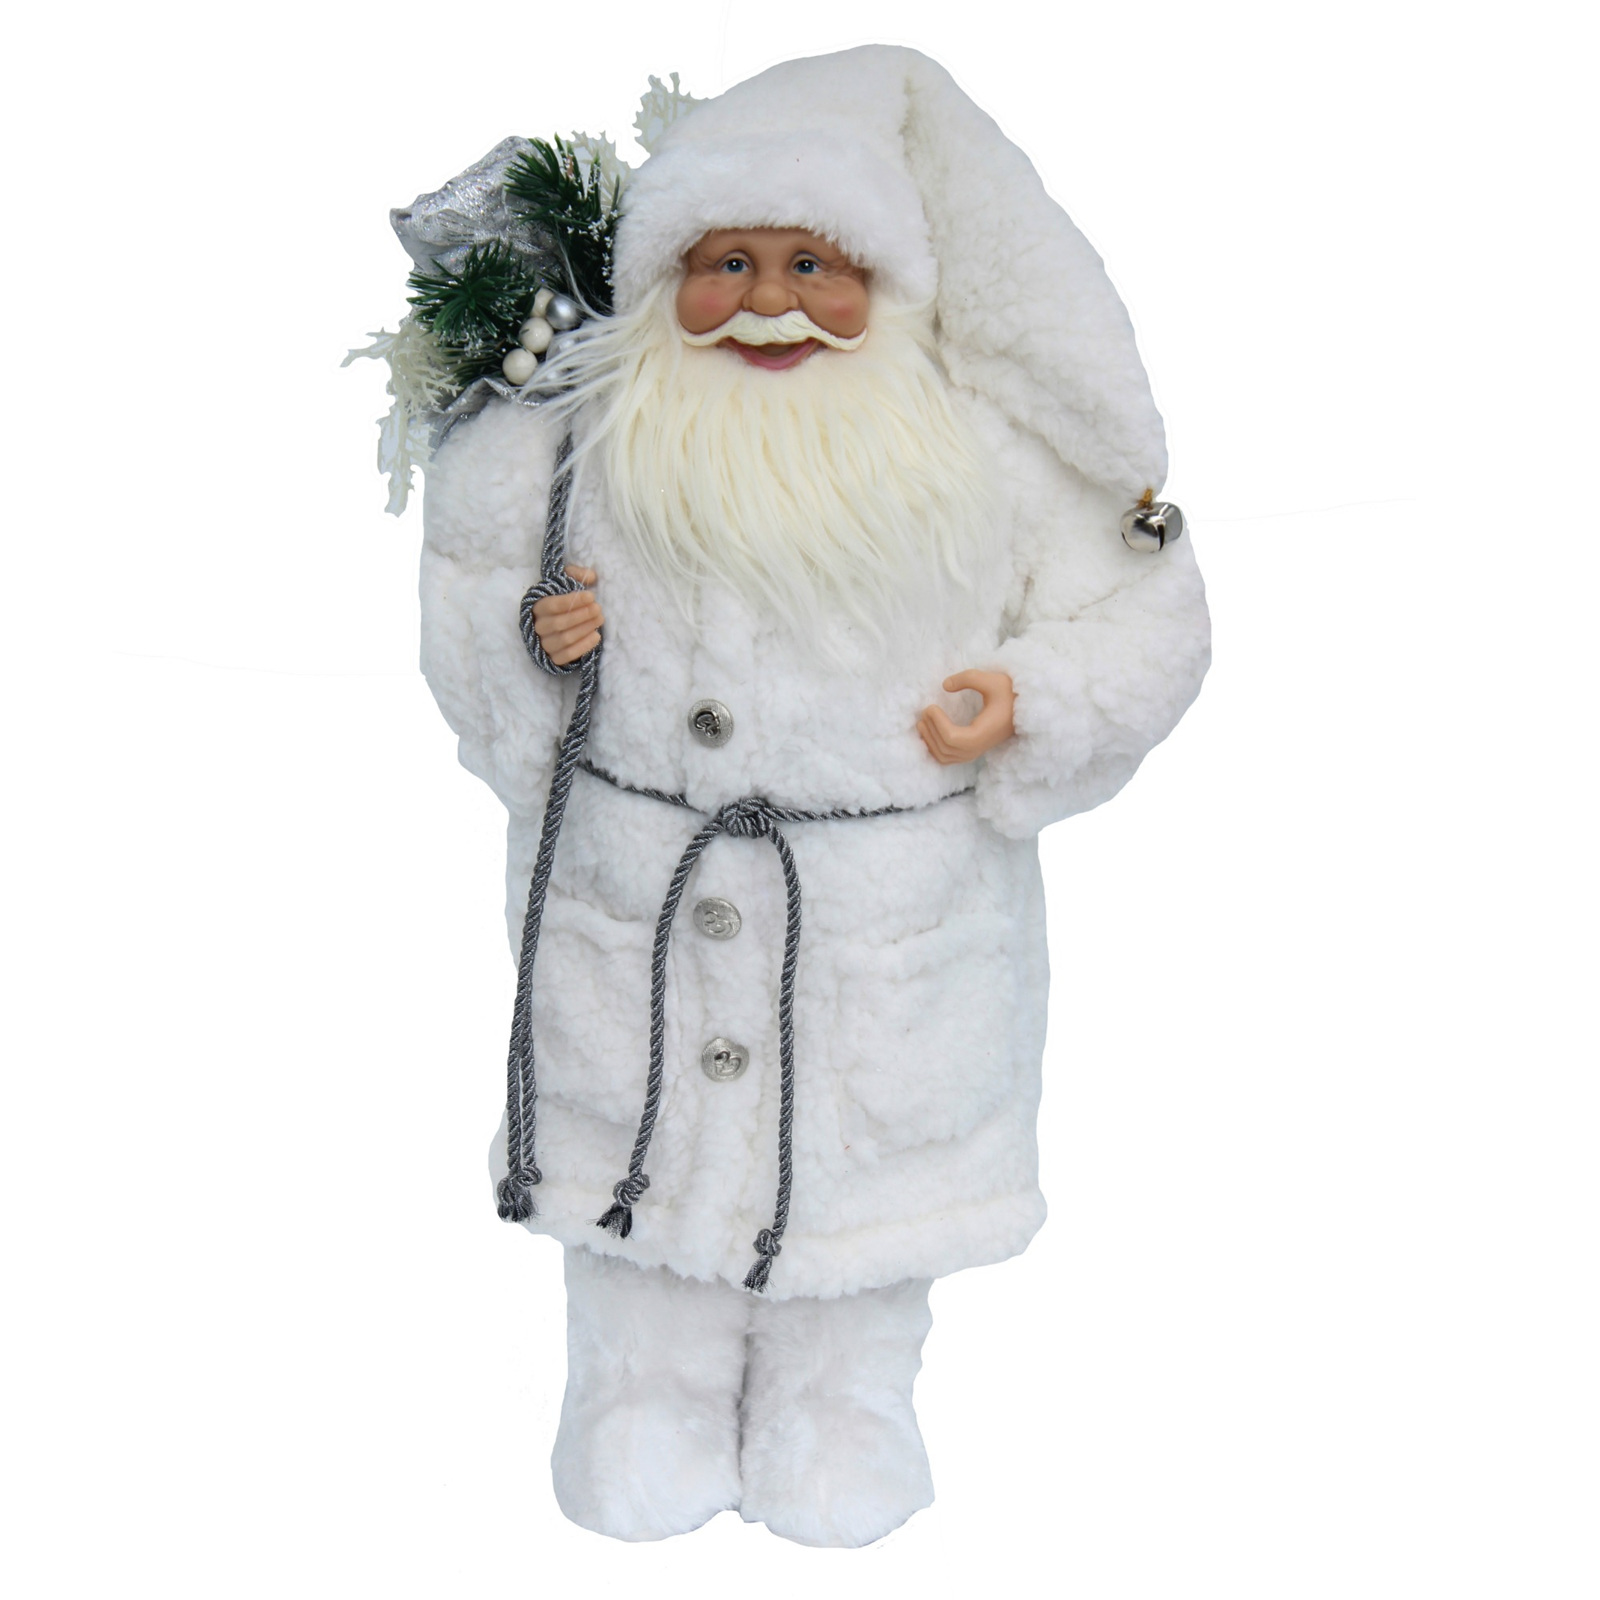 Santa - standing white with wooly jacket - Kingfisher Gifts Party & Xmas